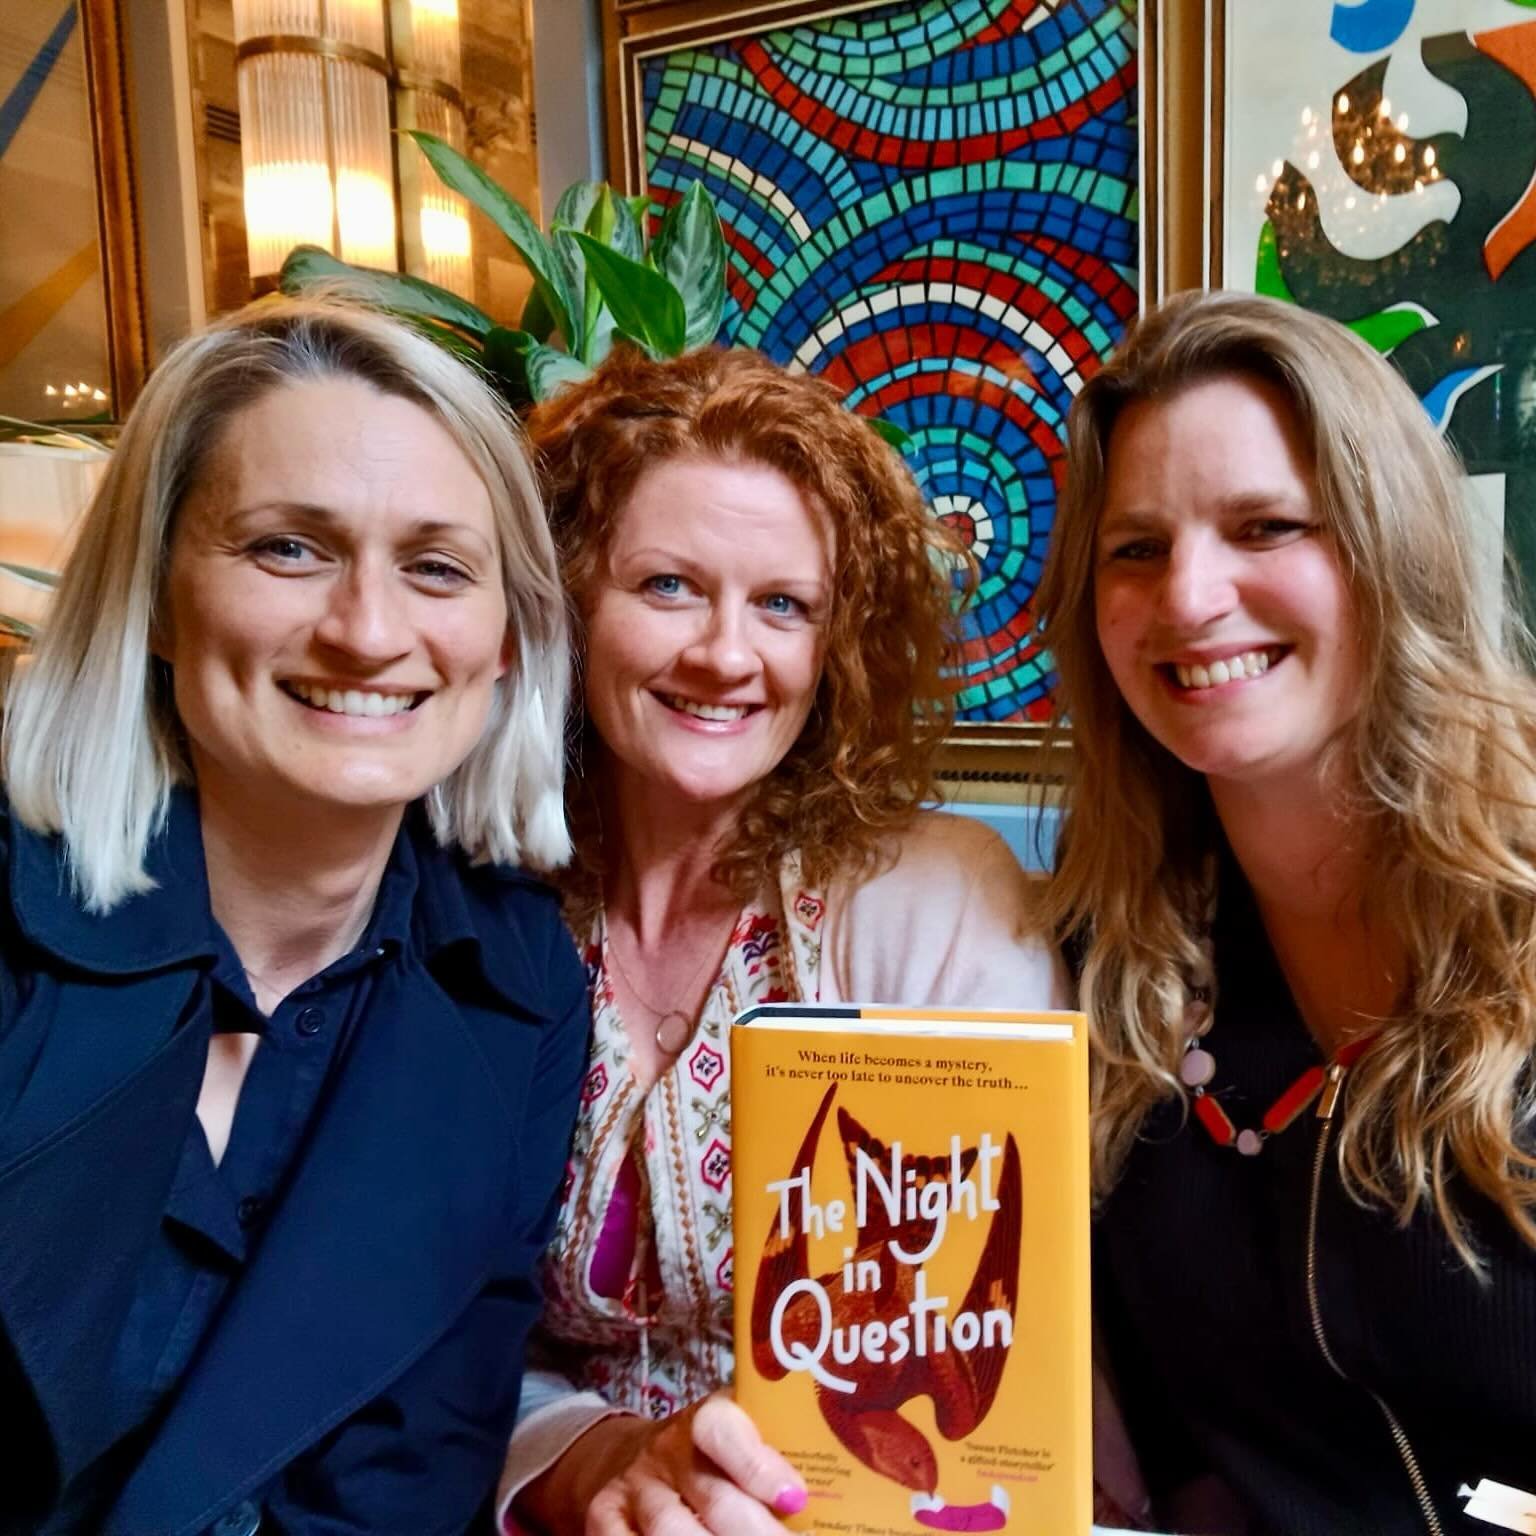 A true treat to get together and celebrate @sfletcherauthor&rsquo;s utterly glorious novel The Night in Question being out in the world 💗💗💗 And swap all the chat too 🥂✨ Here with Sue and Emma Stonex (@lucyclarke_author you were missed!) ✨ Have yo